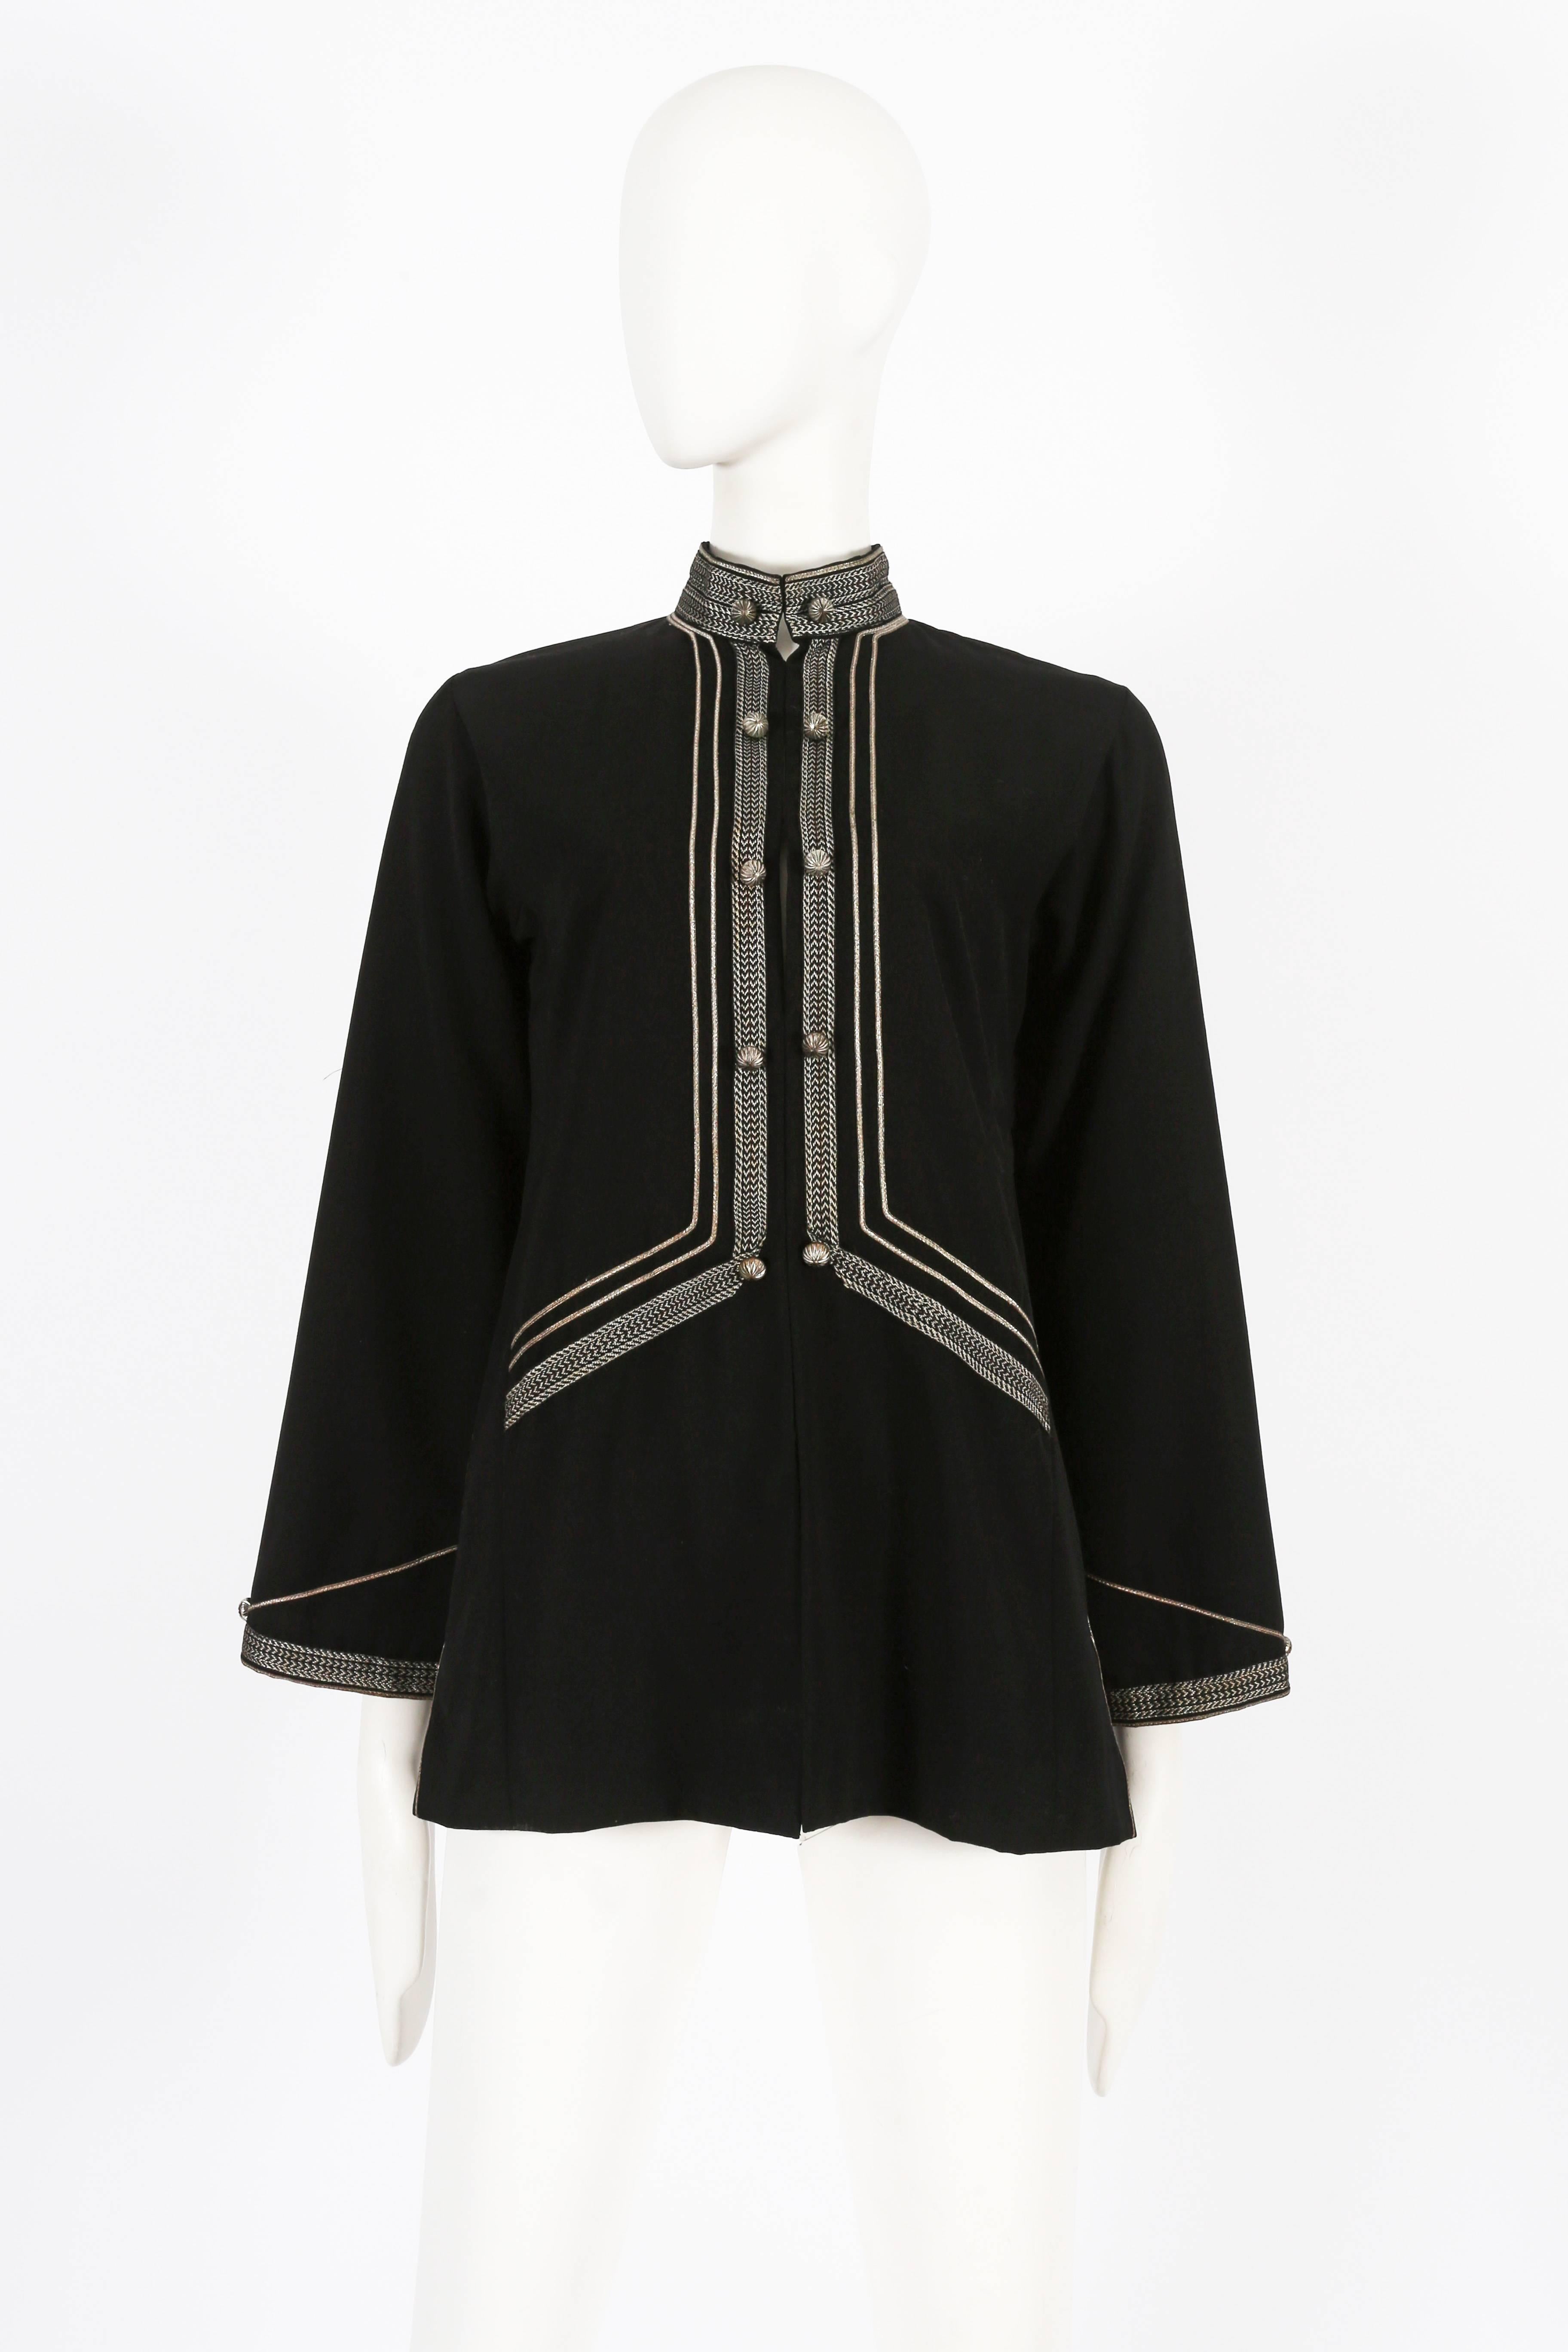 Thea Porter evening jacket with embroidery, circa 1960s For Sale at 1stDibs